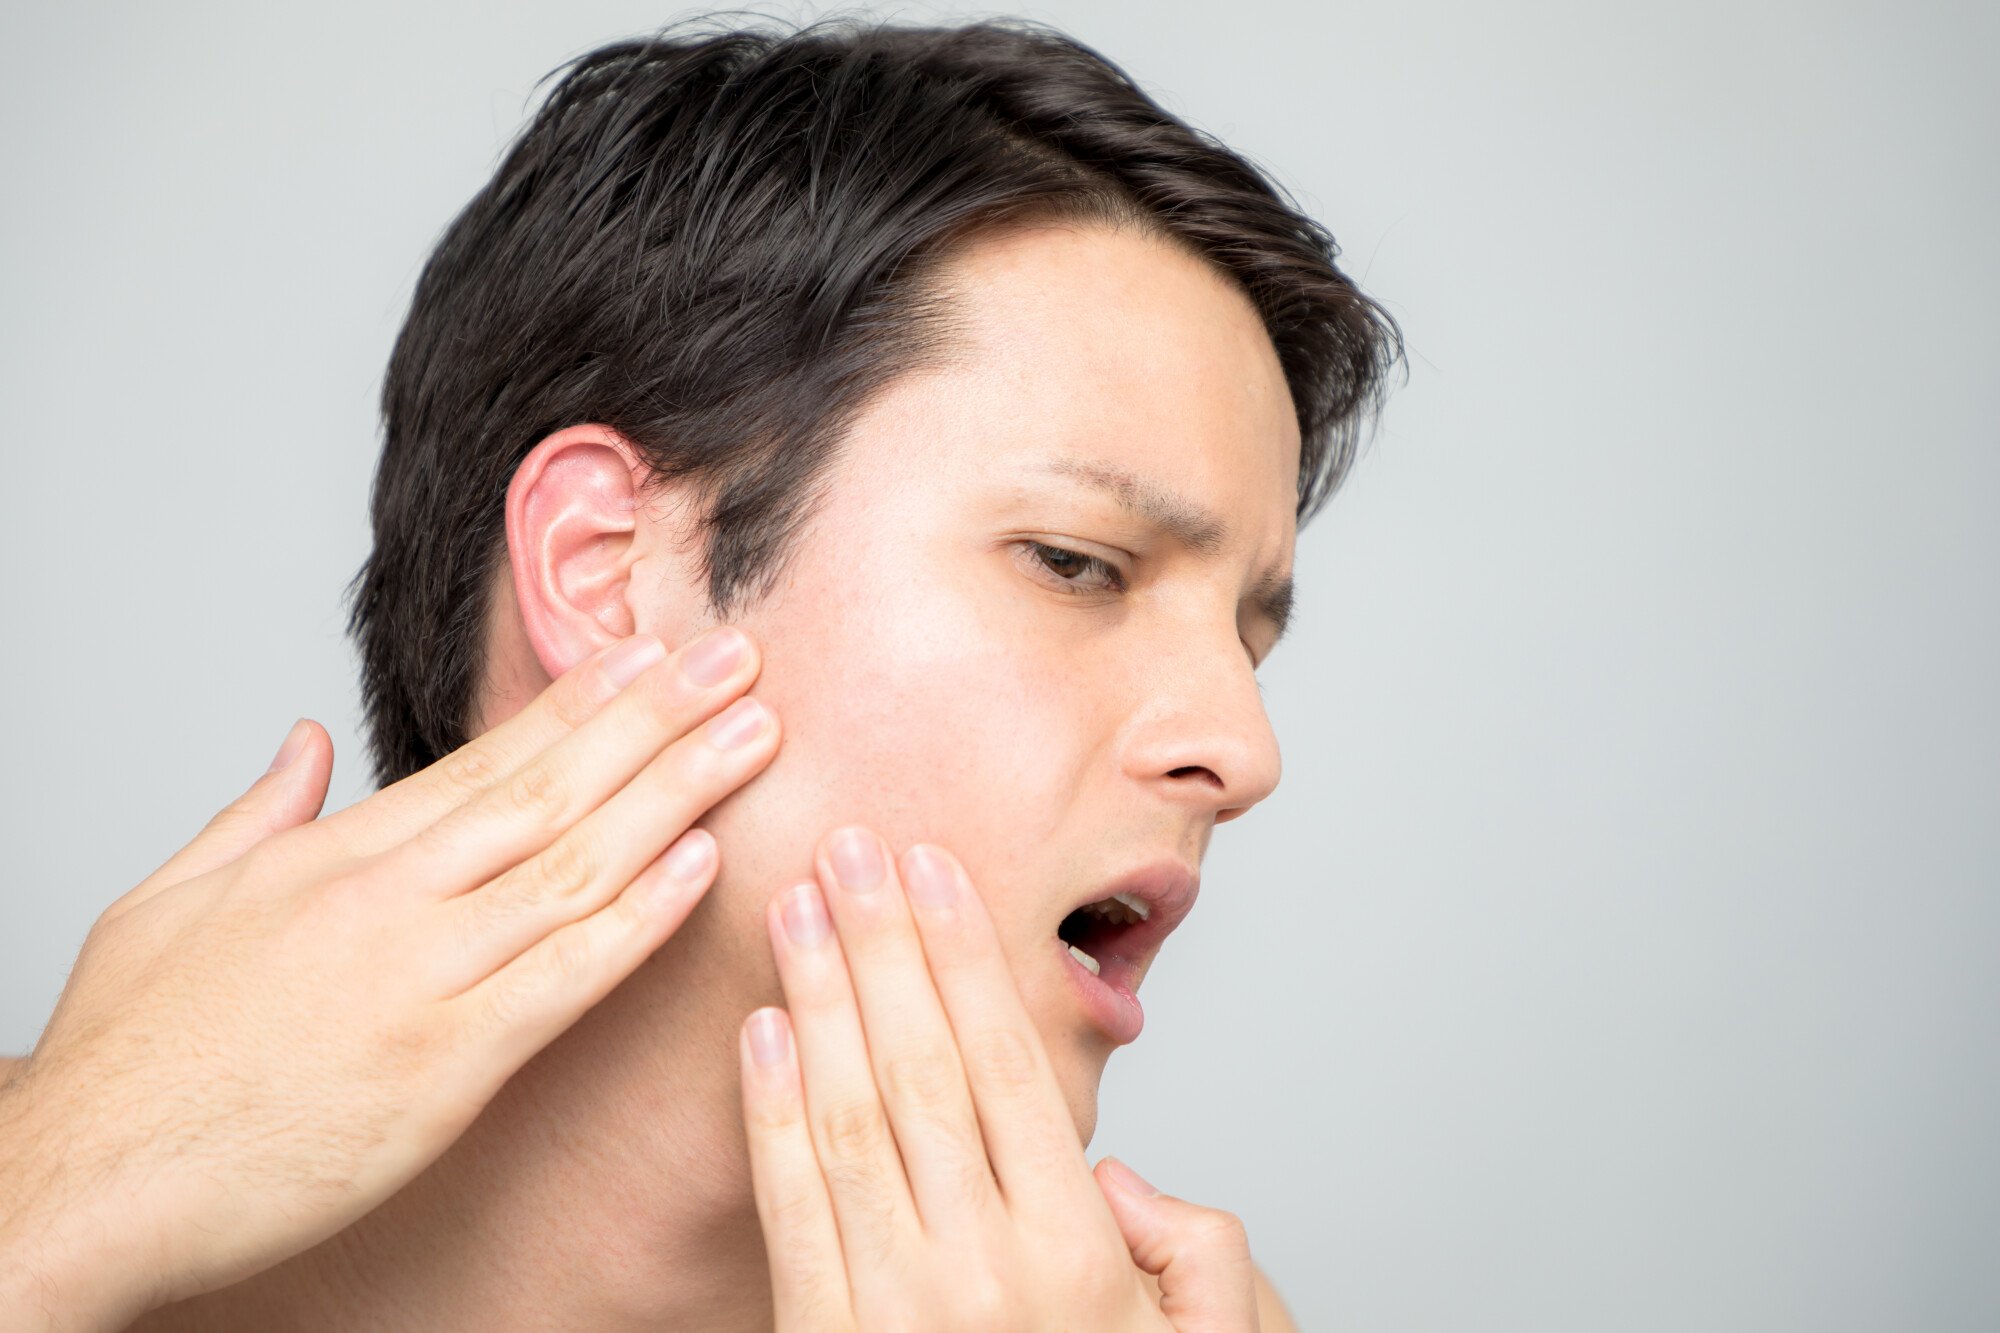 Untreated Jaw Problems: Causes, Effects, and Treatment Options